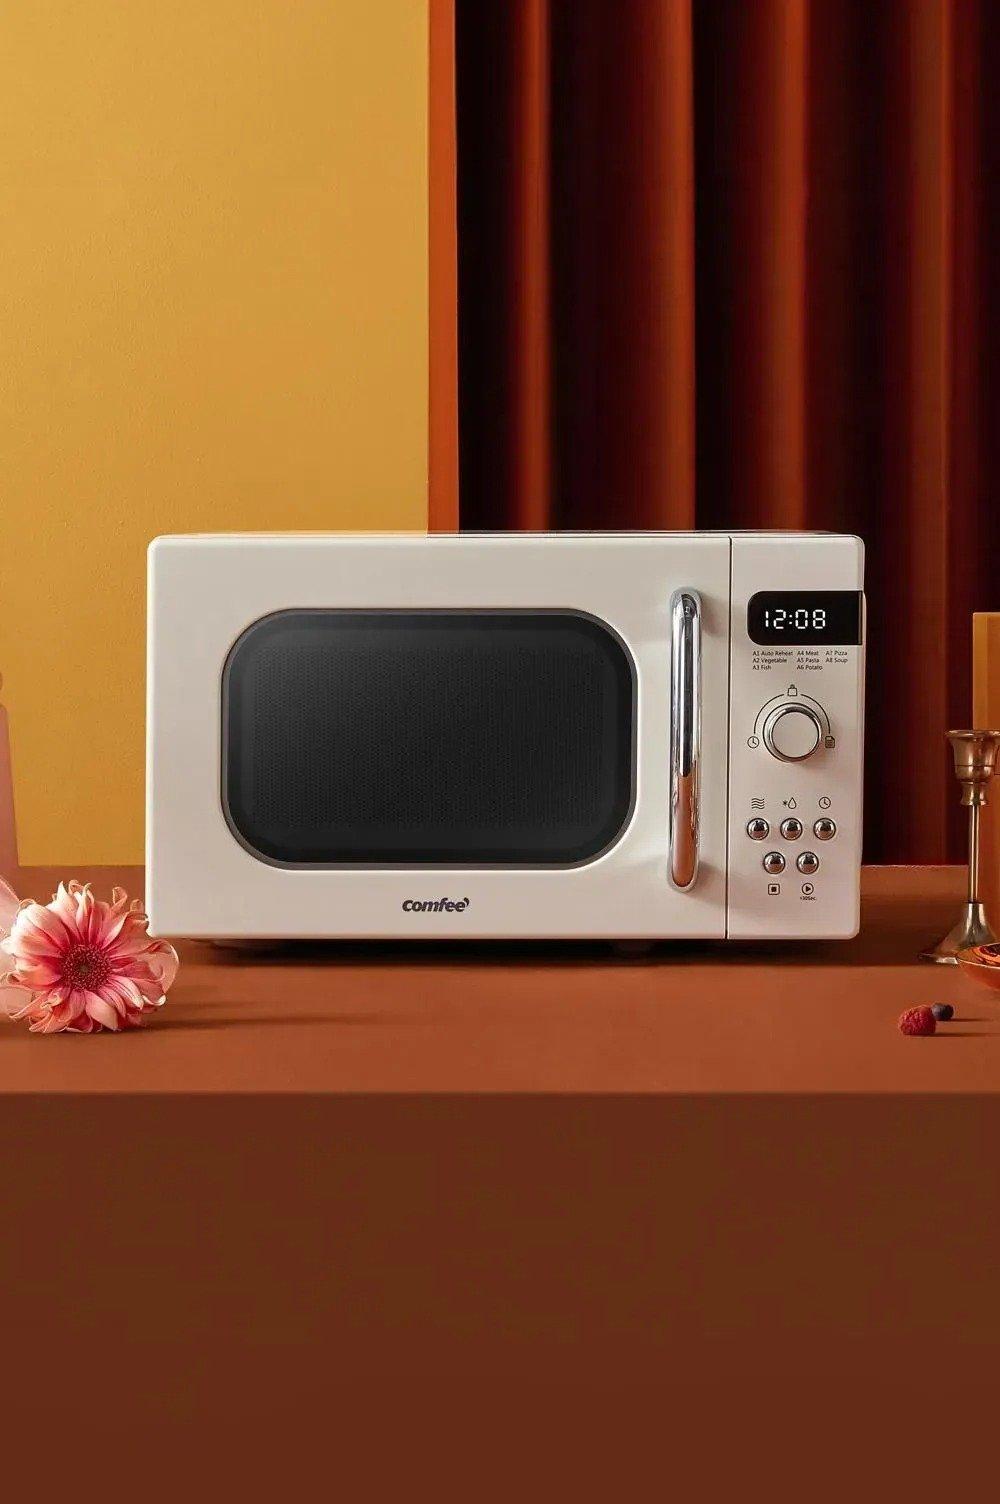 Comfee 800w 20L Retro Style Microwave Oven with 8 Auto Menus, 5 Cooking Power Levels, and Express Co